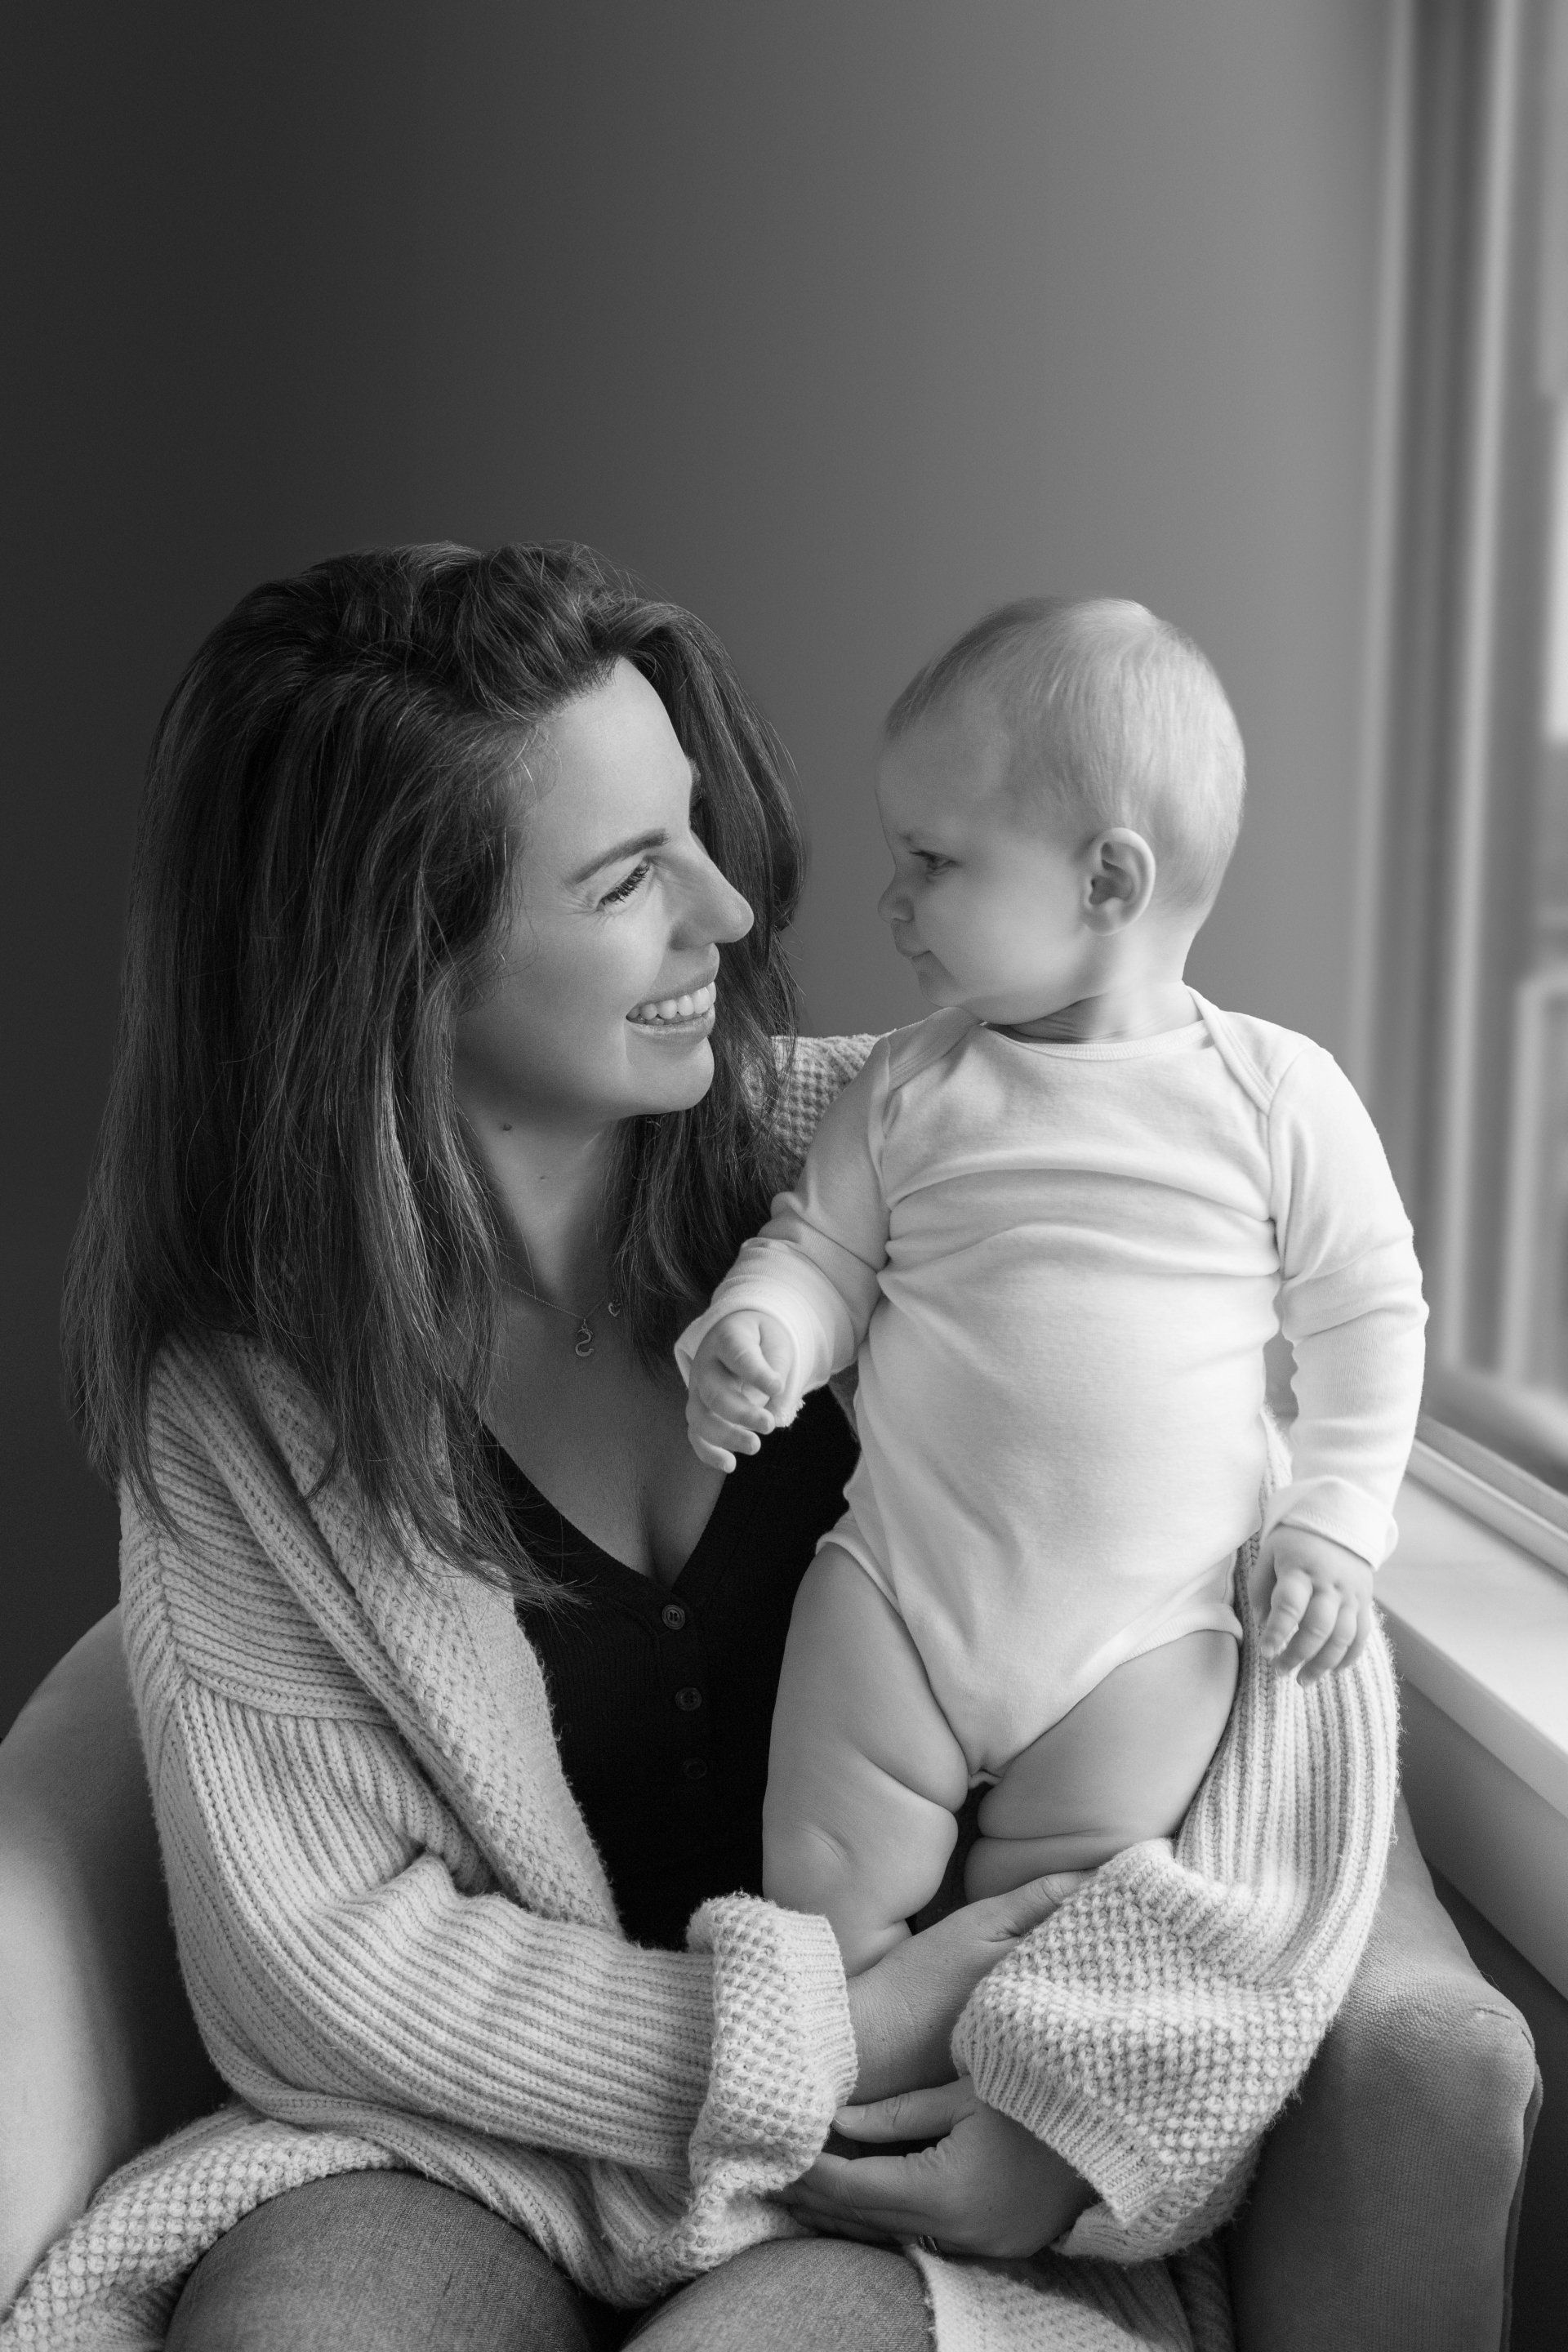 Natalie-DAngelo-Photography-Vancouver-BC-Canada-BlackWhite-Family-Portraits-Visual-Storyteller-mother-baby-looking-each-other